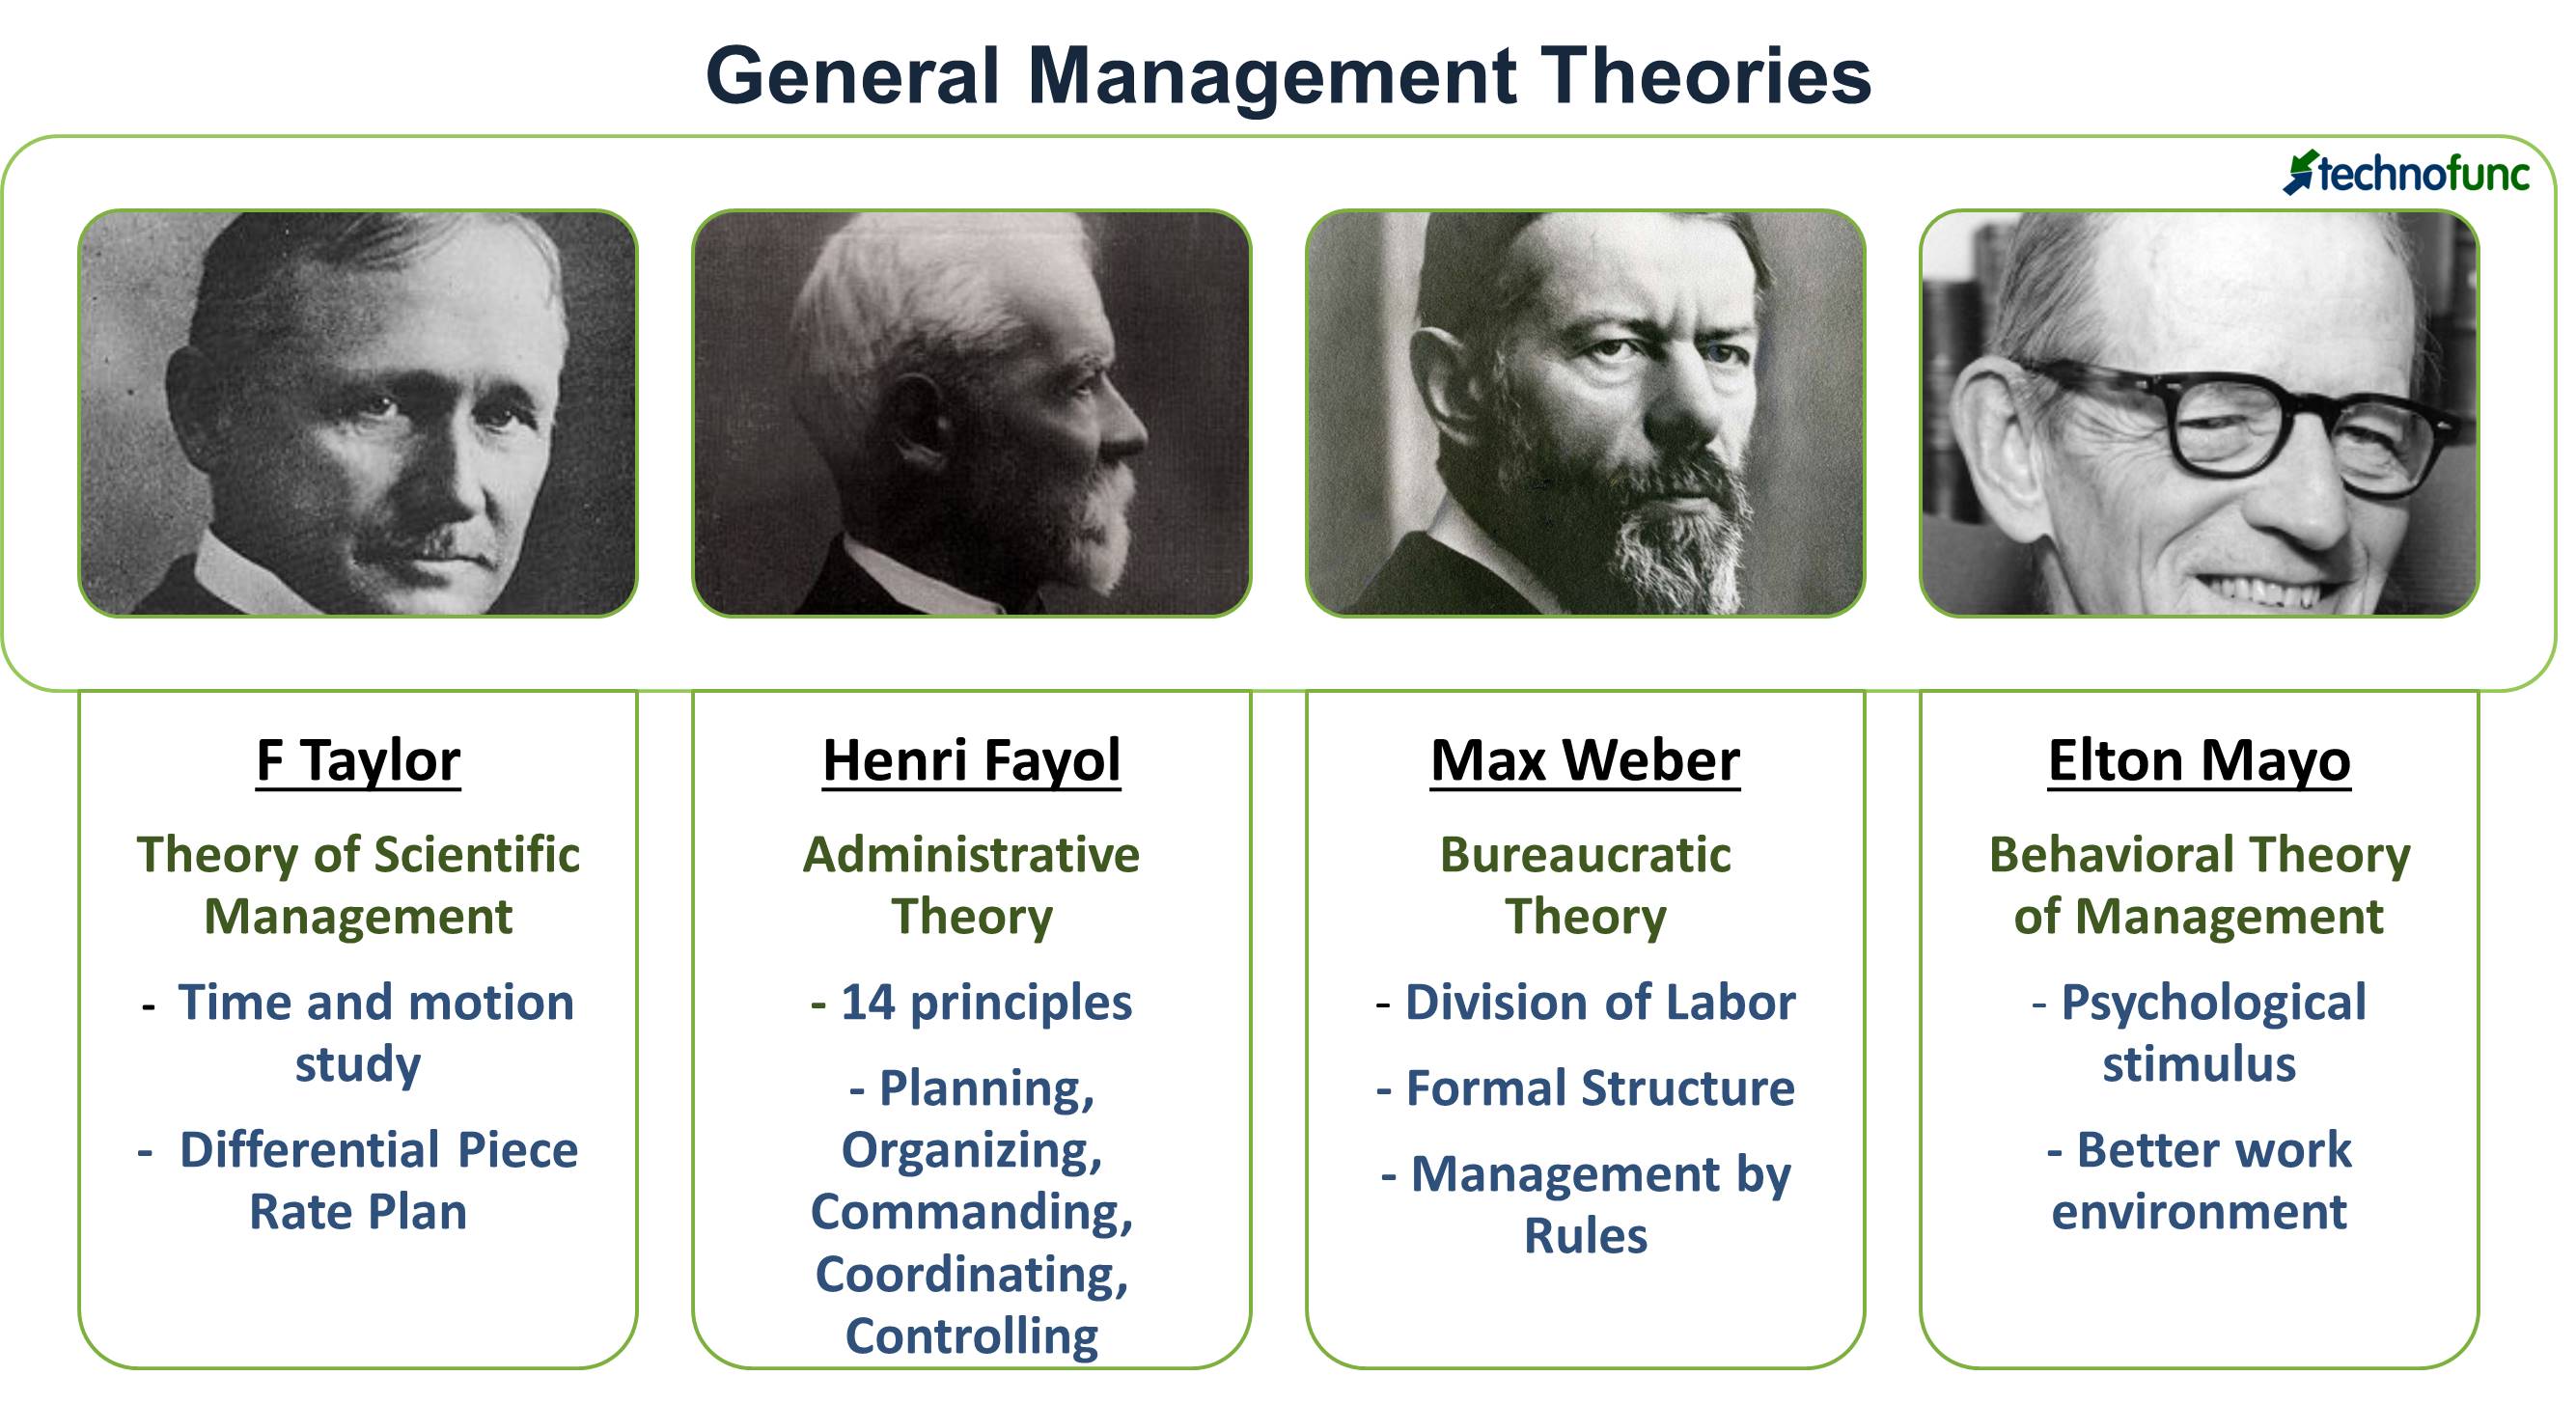 classical administrative management theory